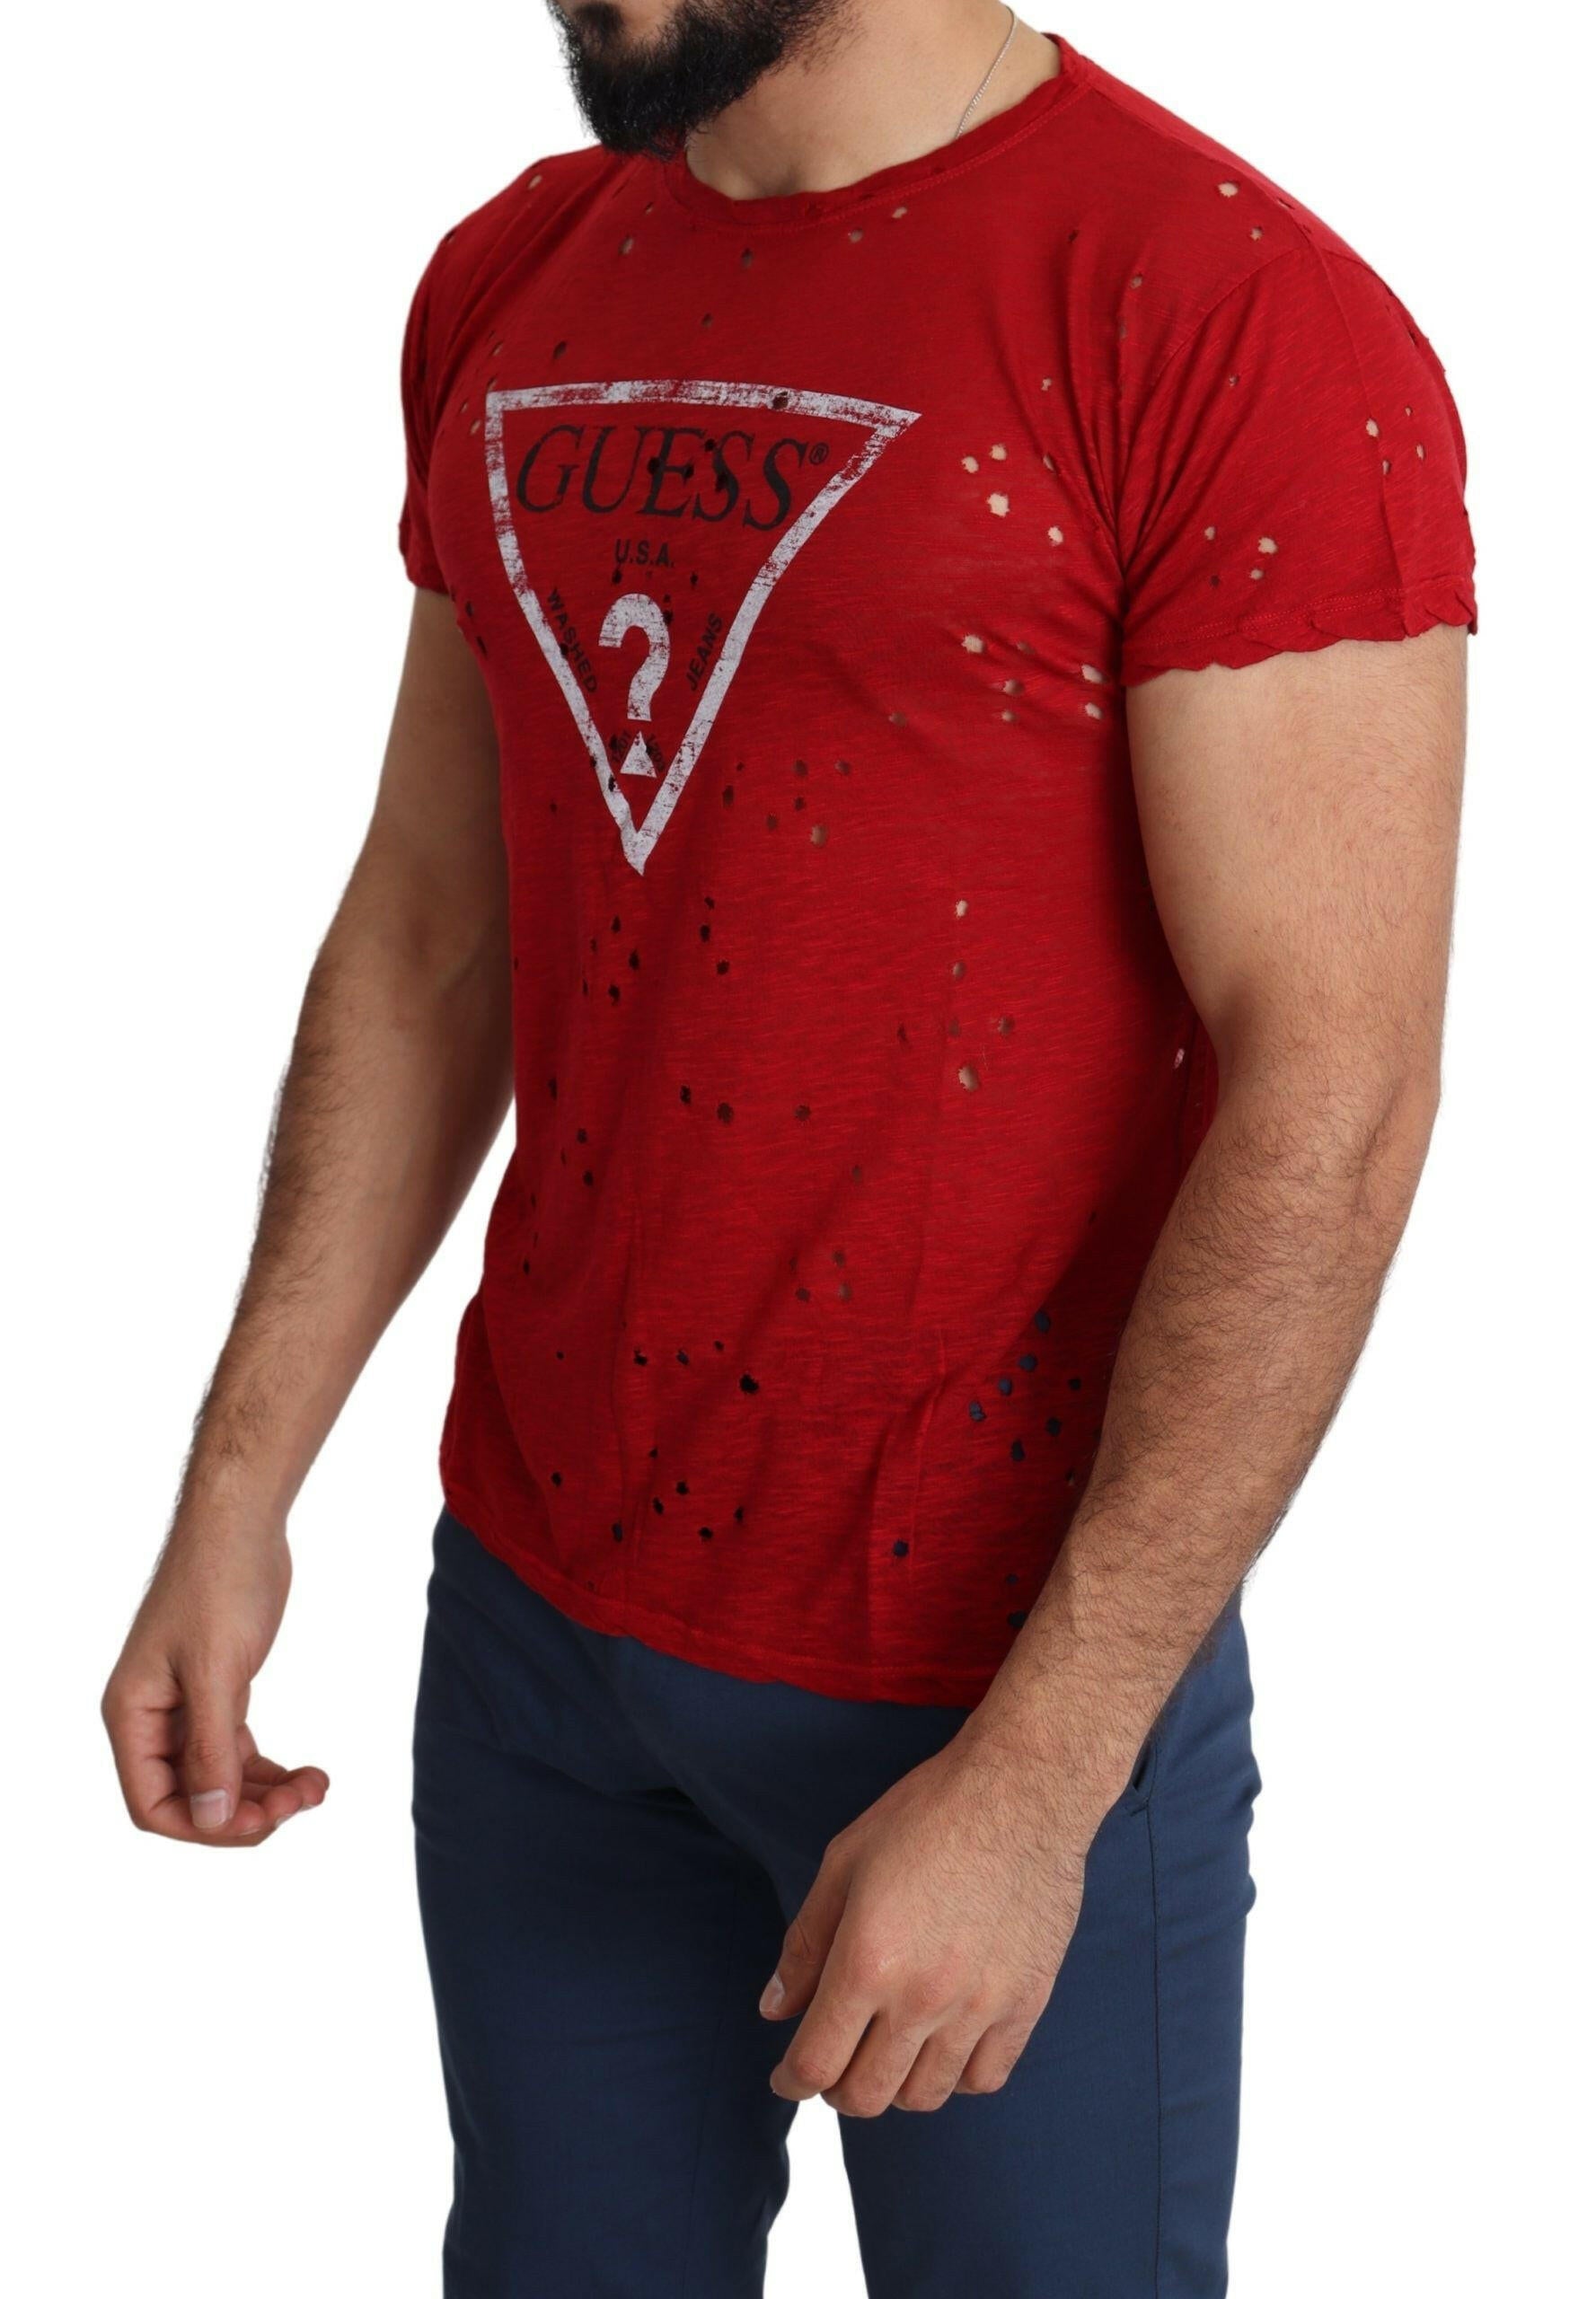 Guess Radiant Red Cotton Stretch T-Shirt.